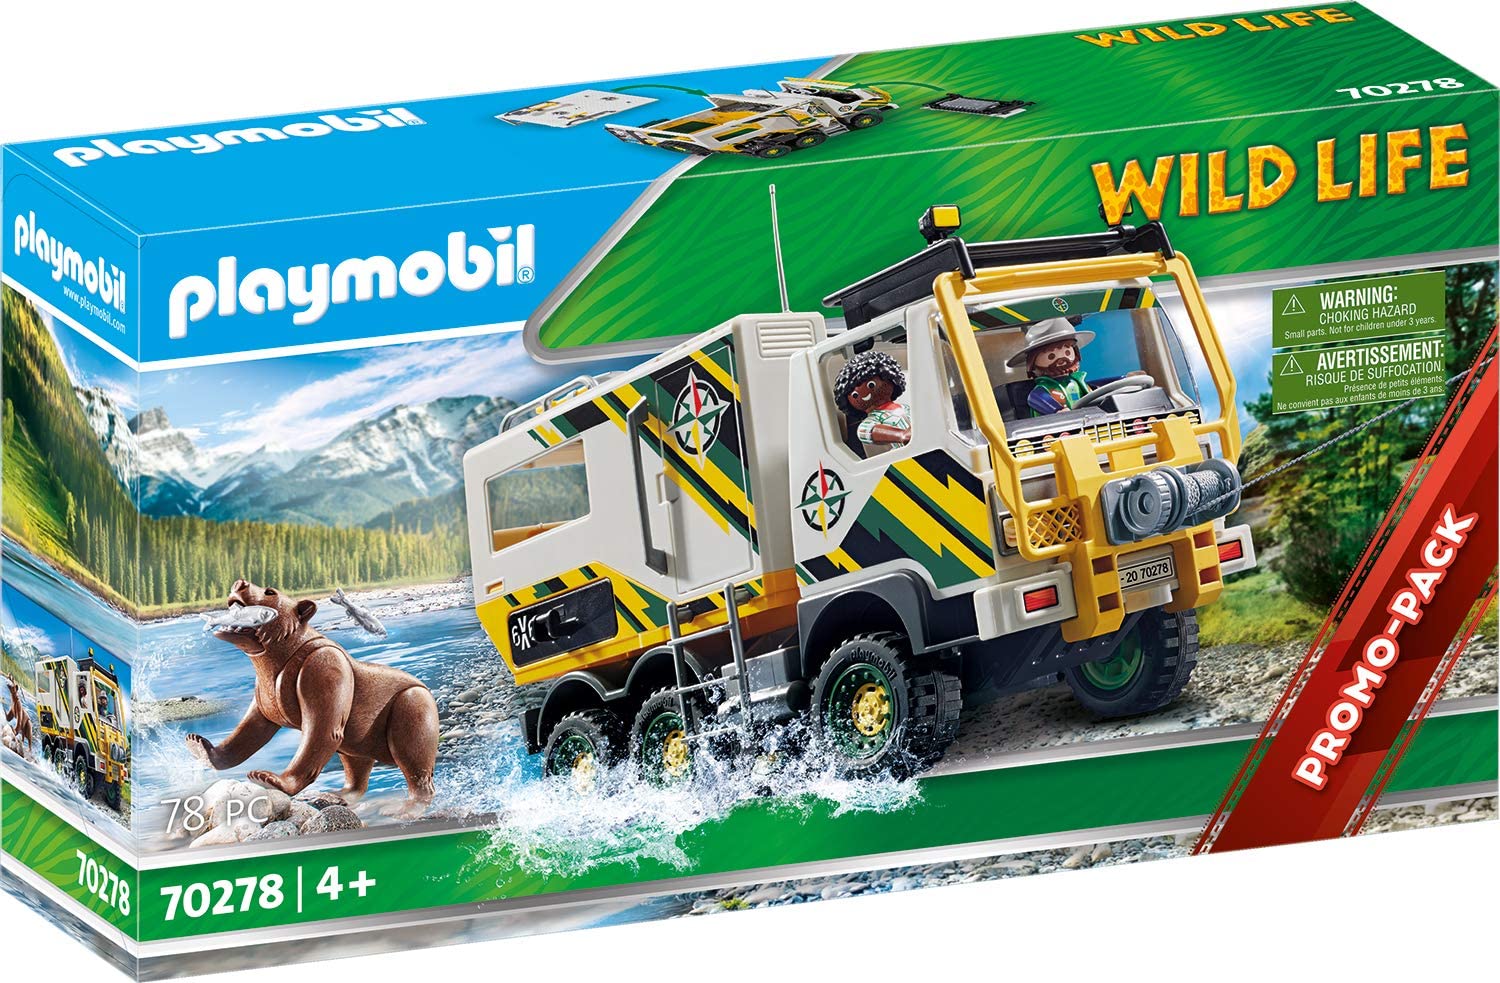 Playmobil Wild Life 70278 Expedition Rucksack, 4 Years And Up